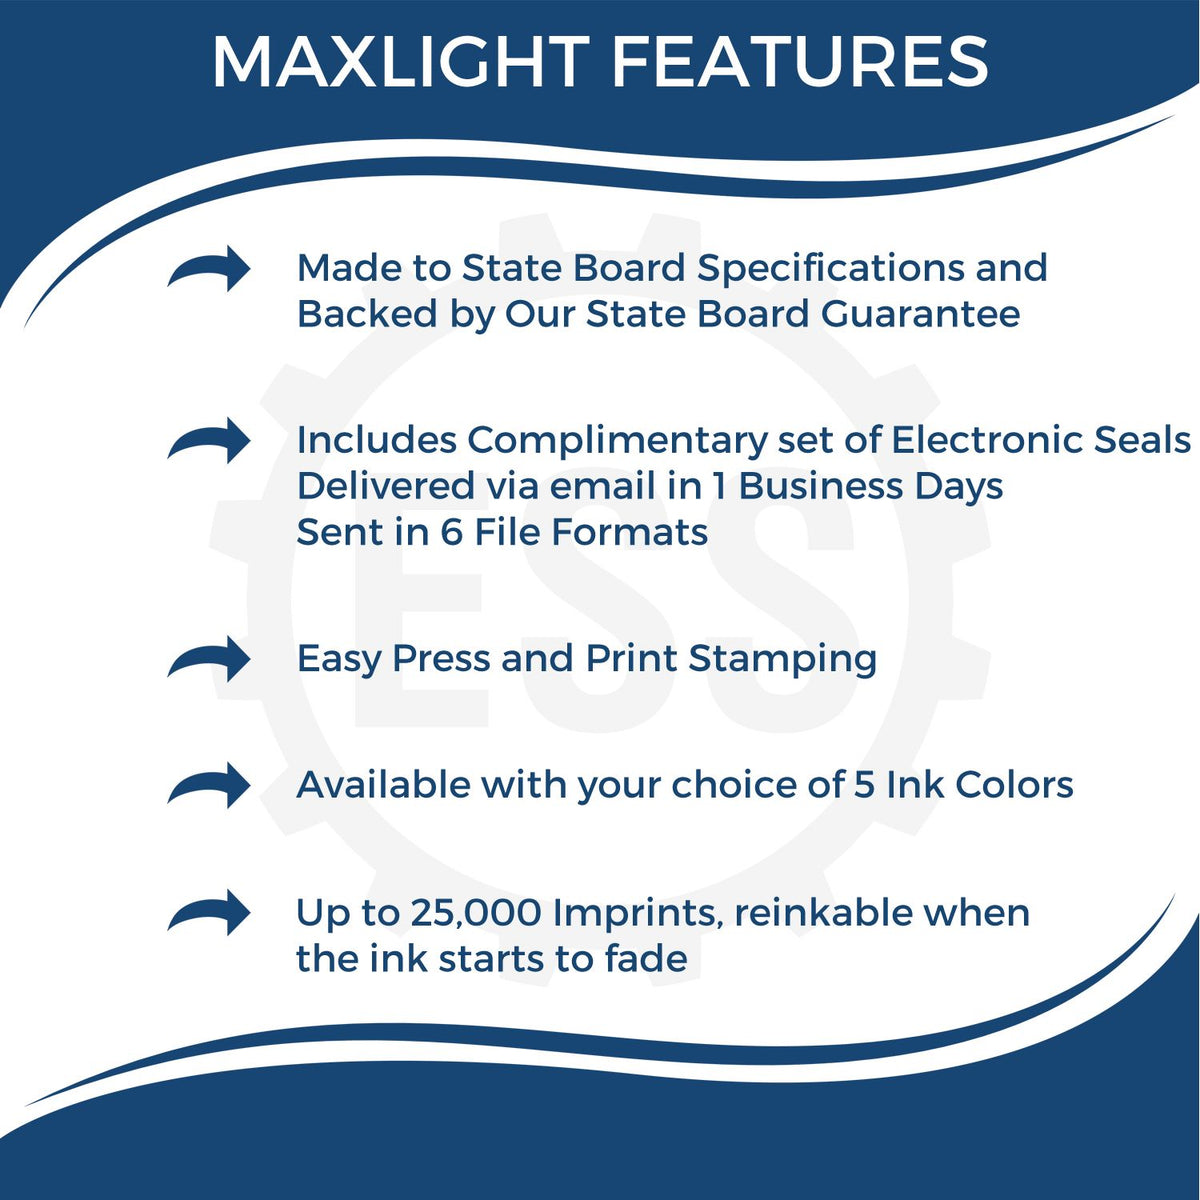 A picture of an infographic highlighting the selling points for the Premium MaxLight Pre-Inked Ohio Engineering Stamp